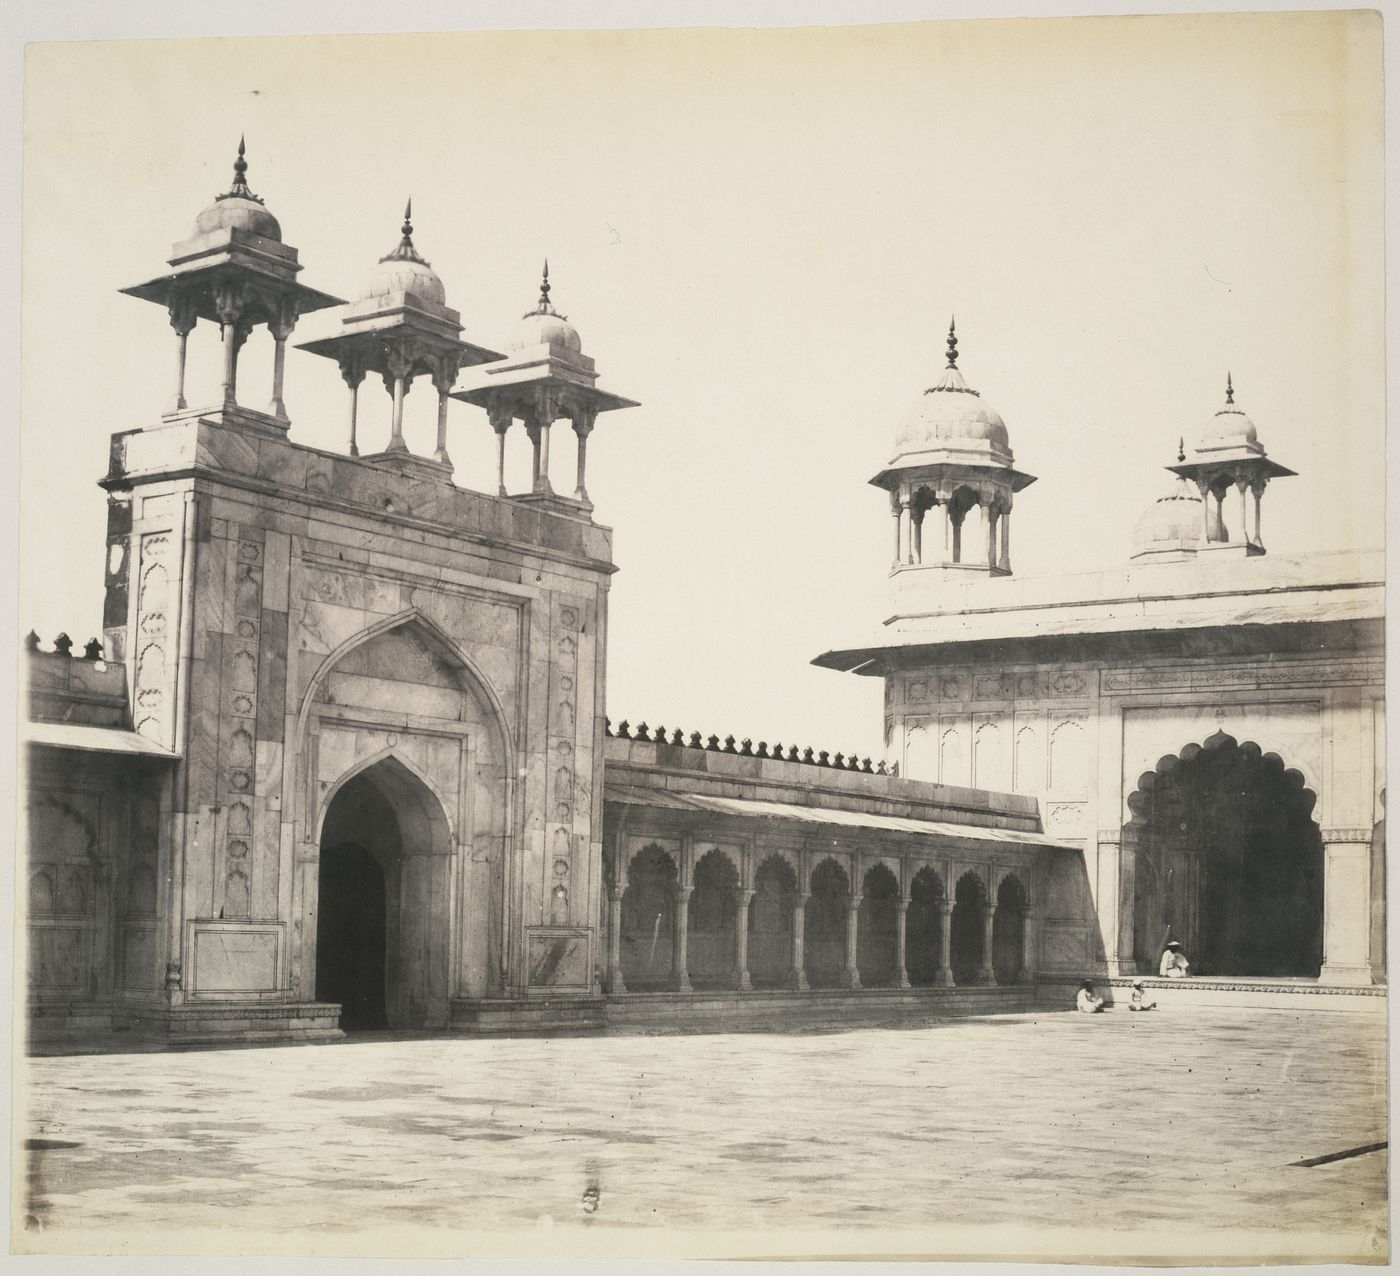 Panorama of the Moti Masjid [Pearl Mosque] showing part of the façade and the portal, Agra Fort, Agra, India